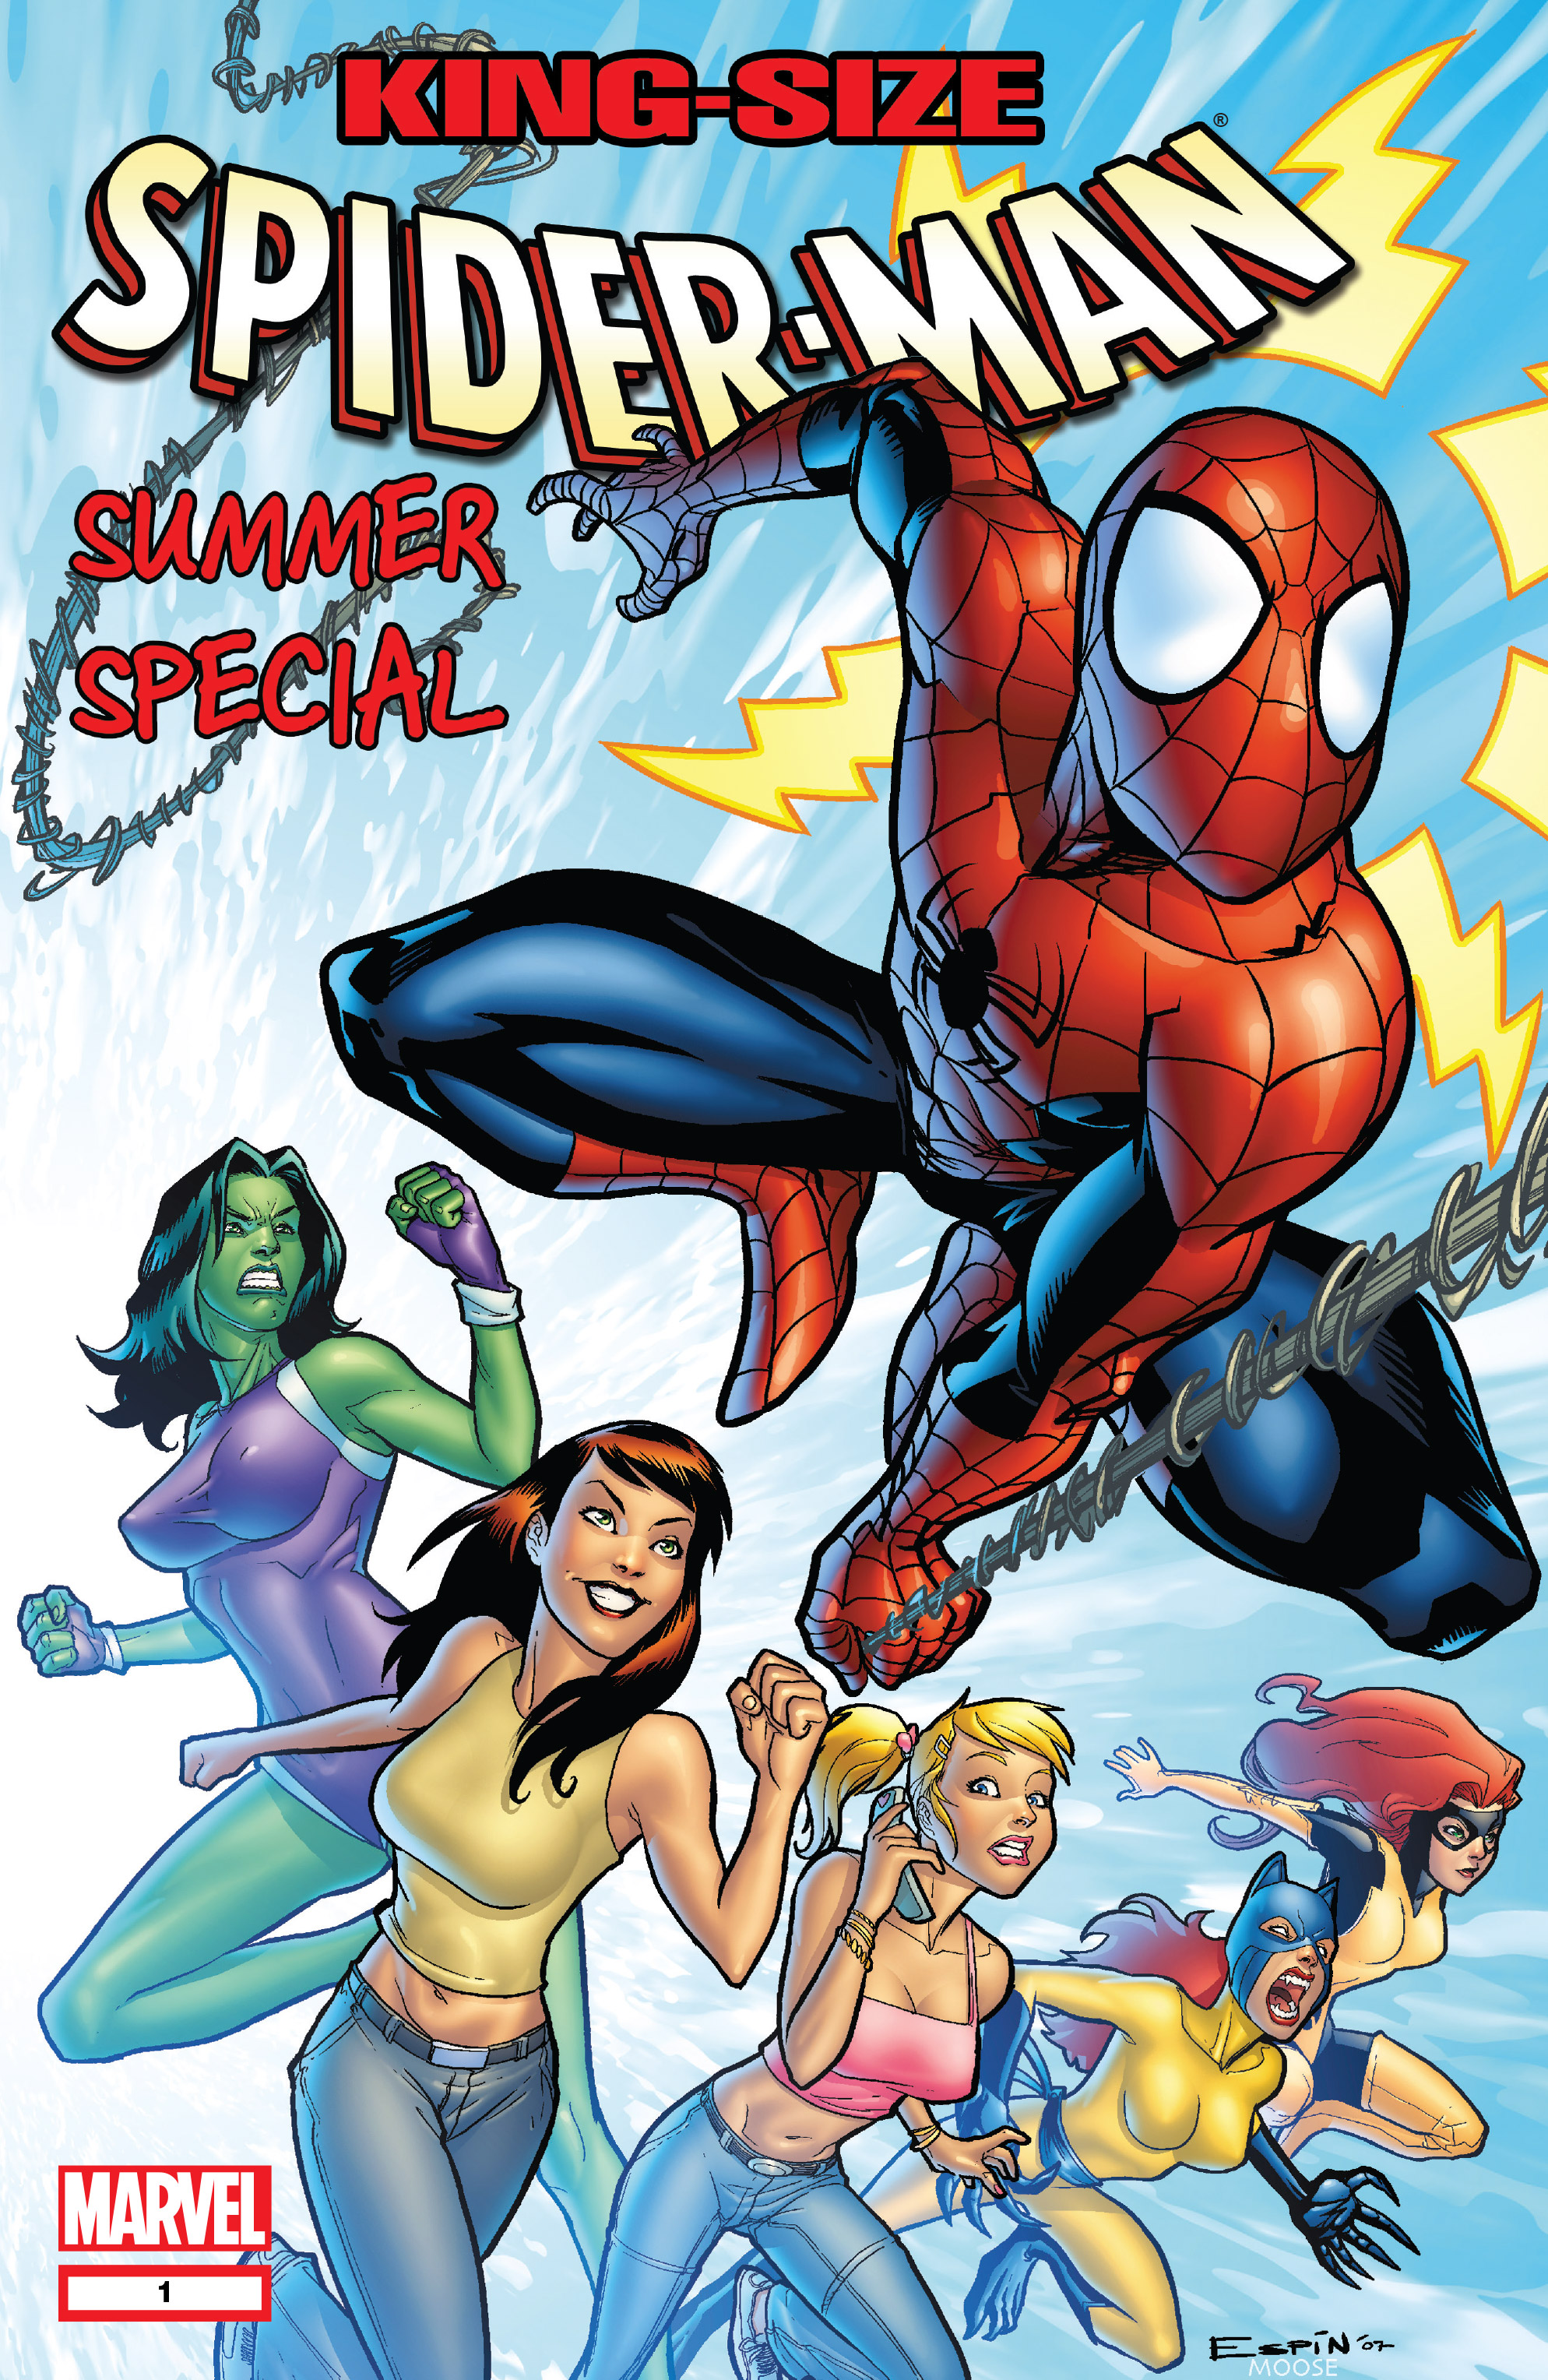 Read online King-Size Spider-Man Summer Special comic -  Issue # Full - 1